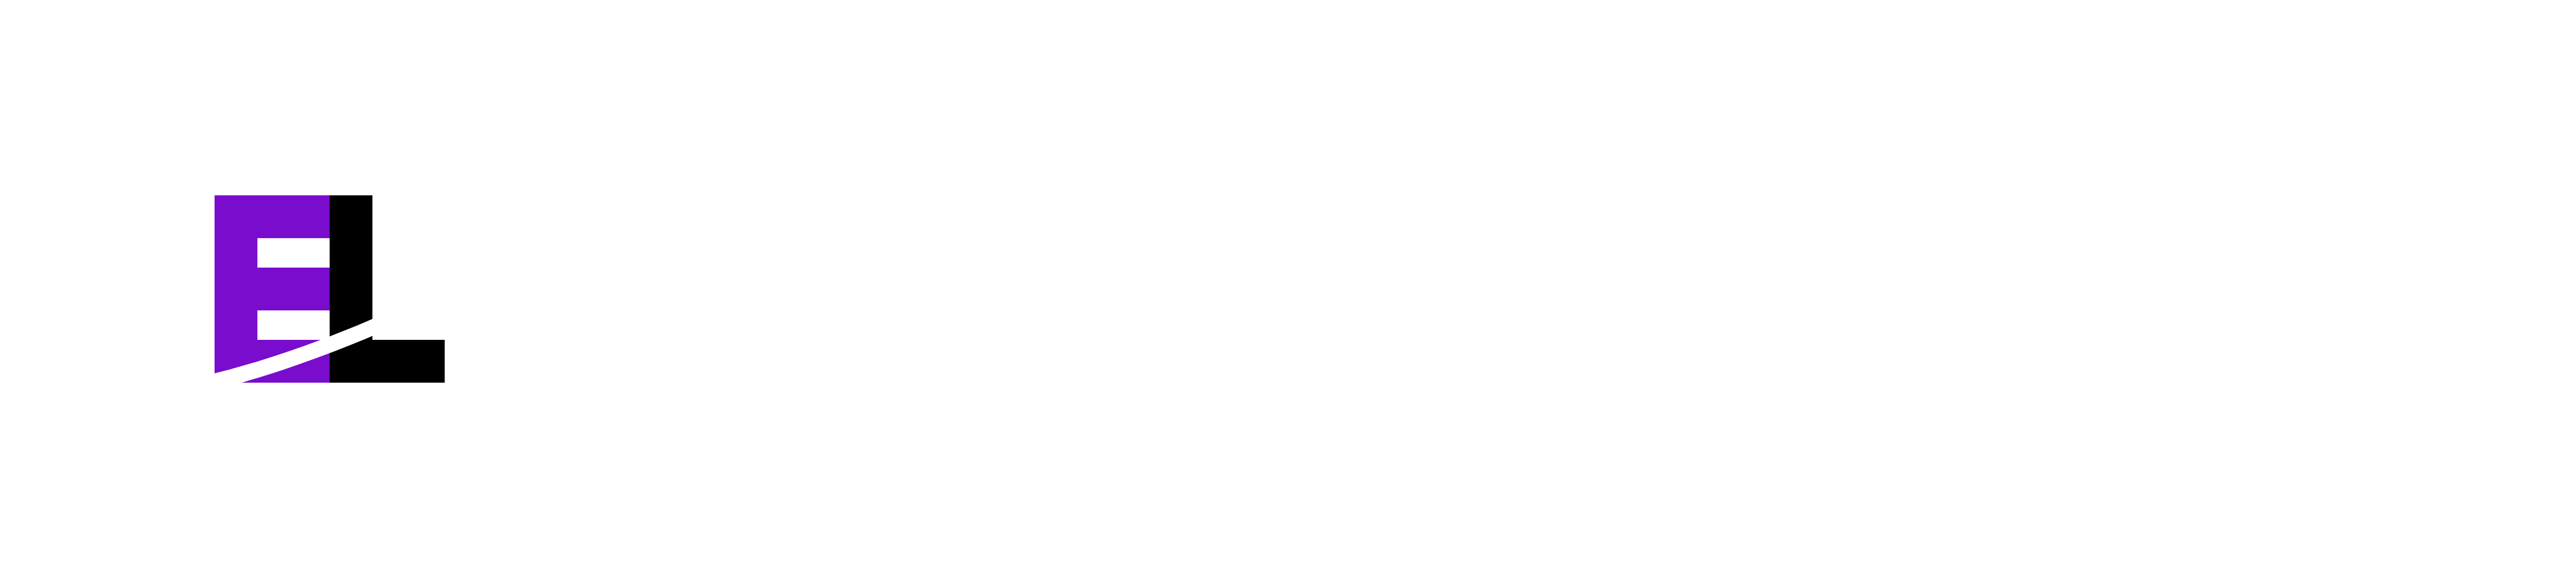 Expanse Labs